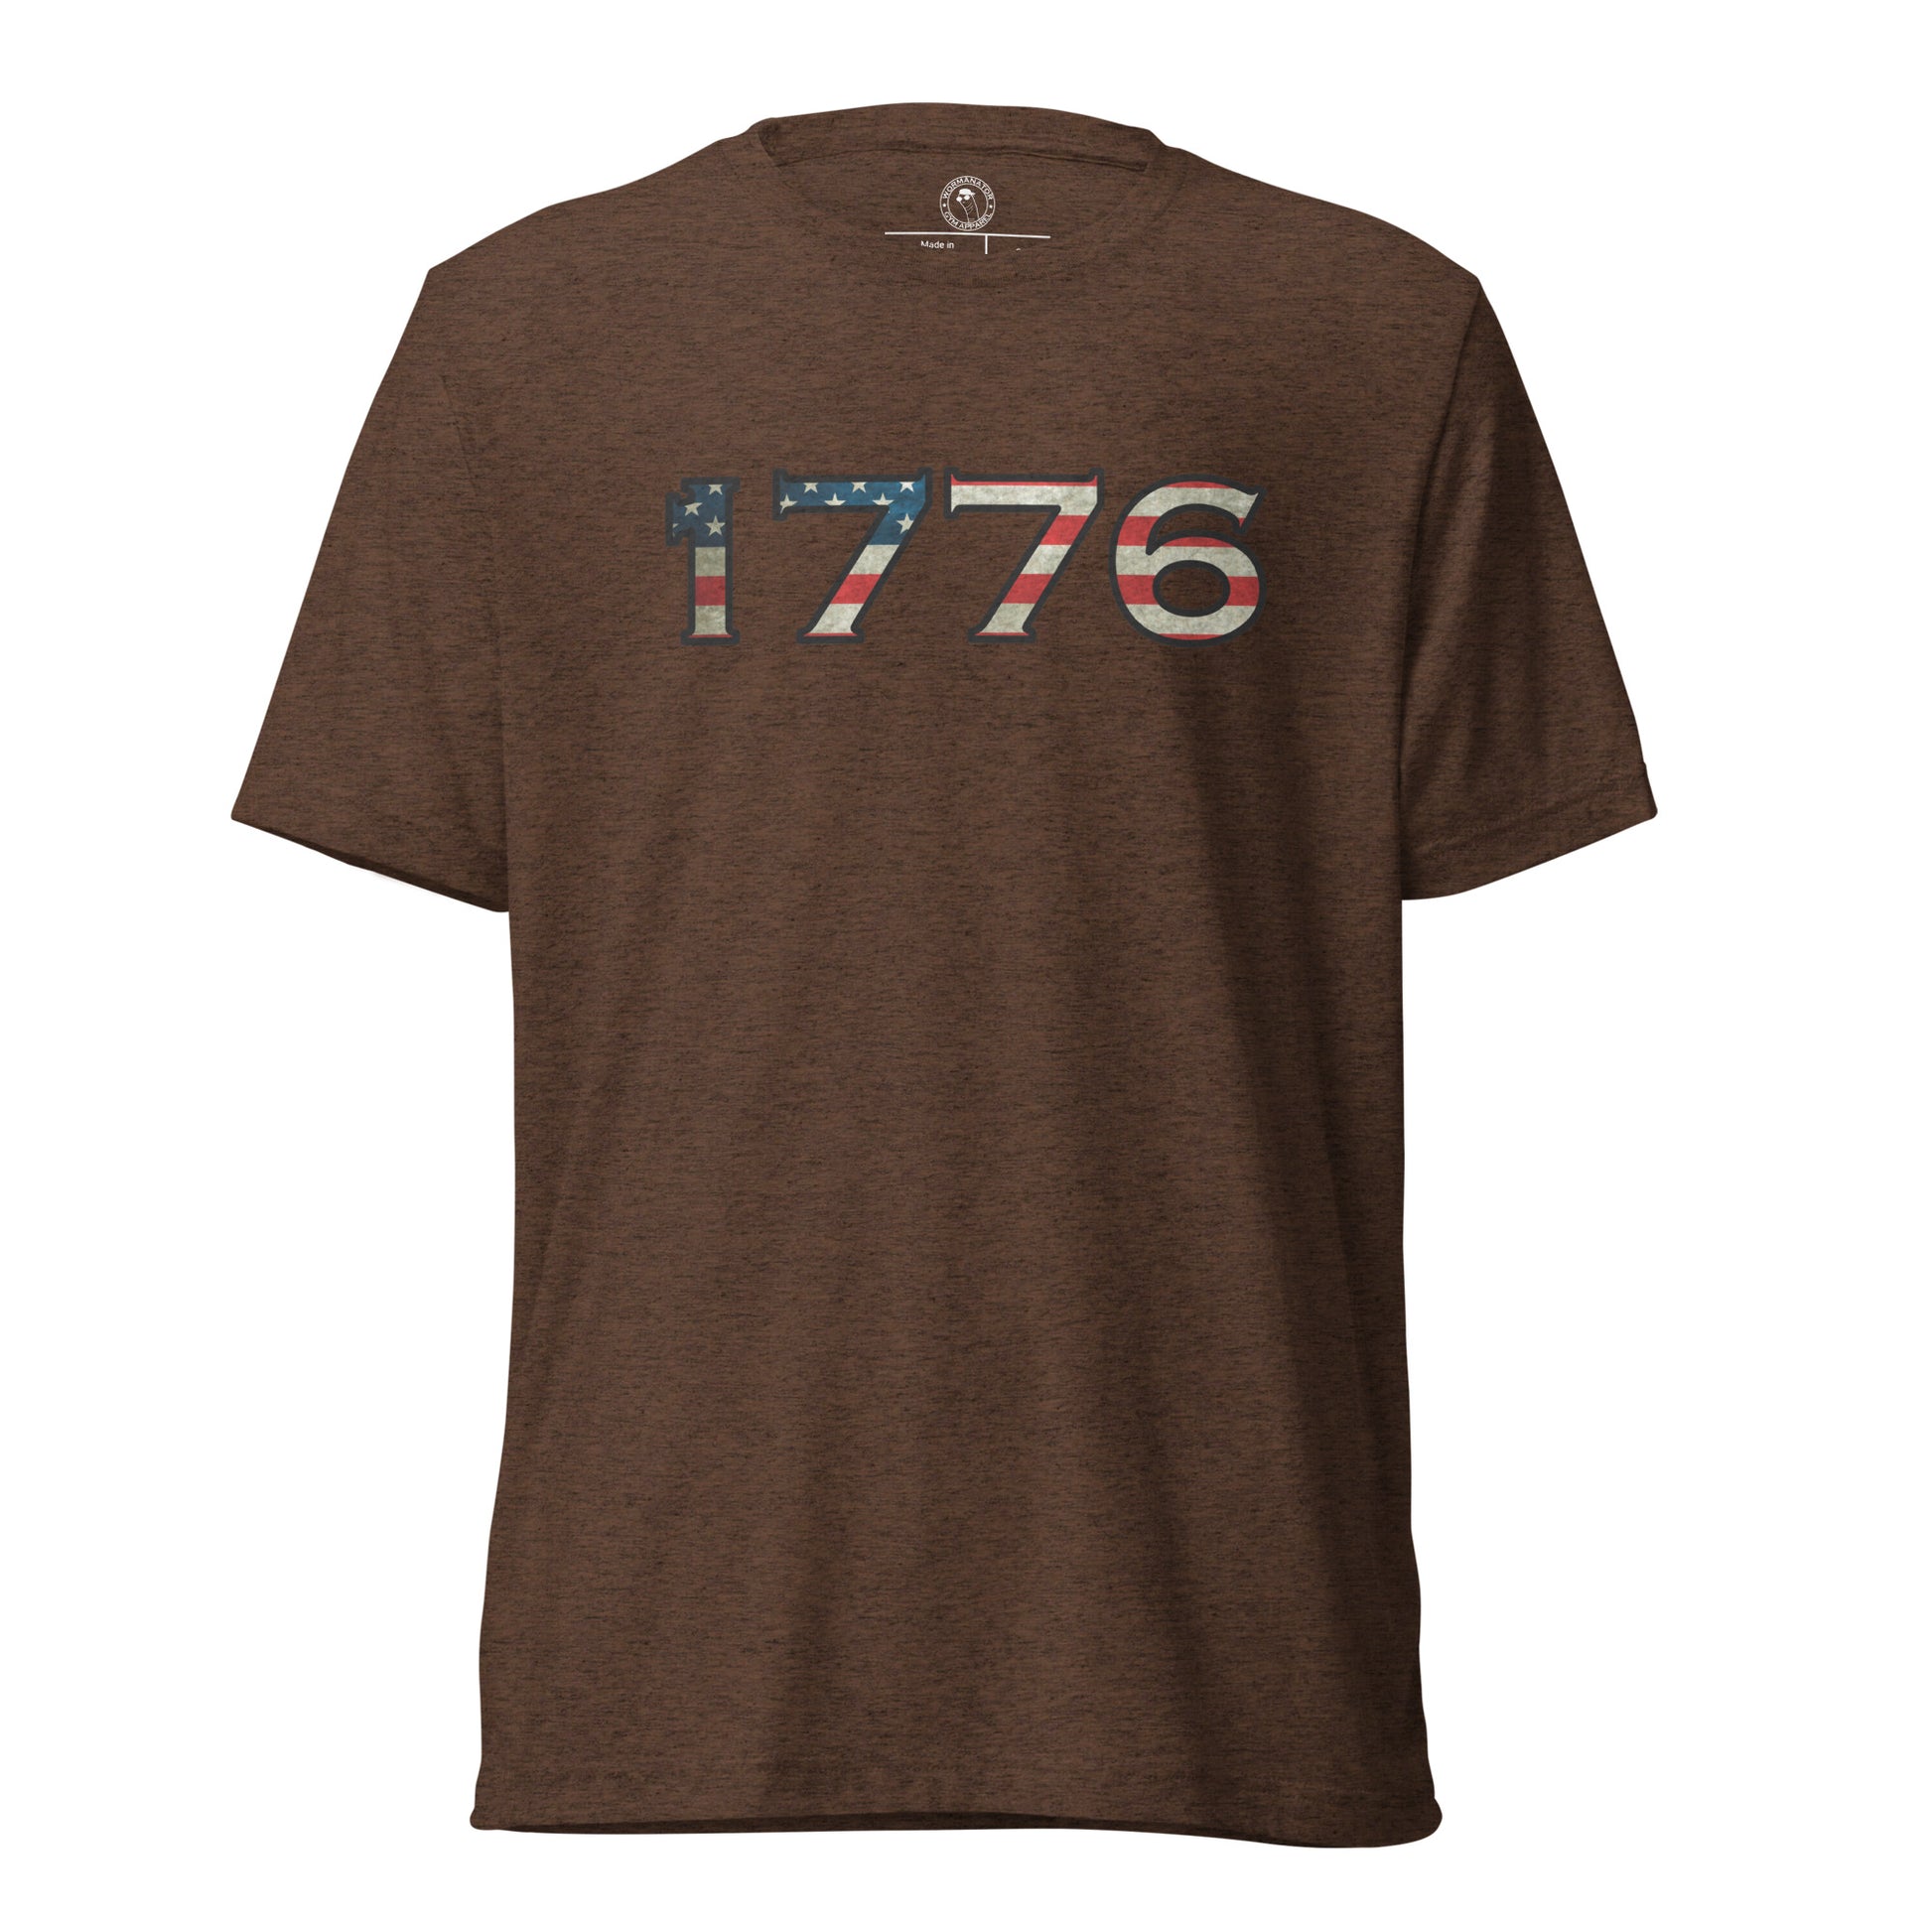 1776 T-Shirt in Brown Triblend